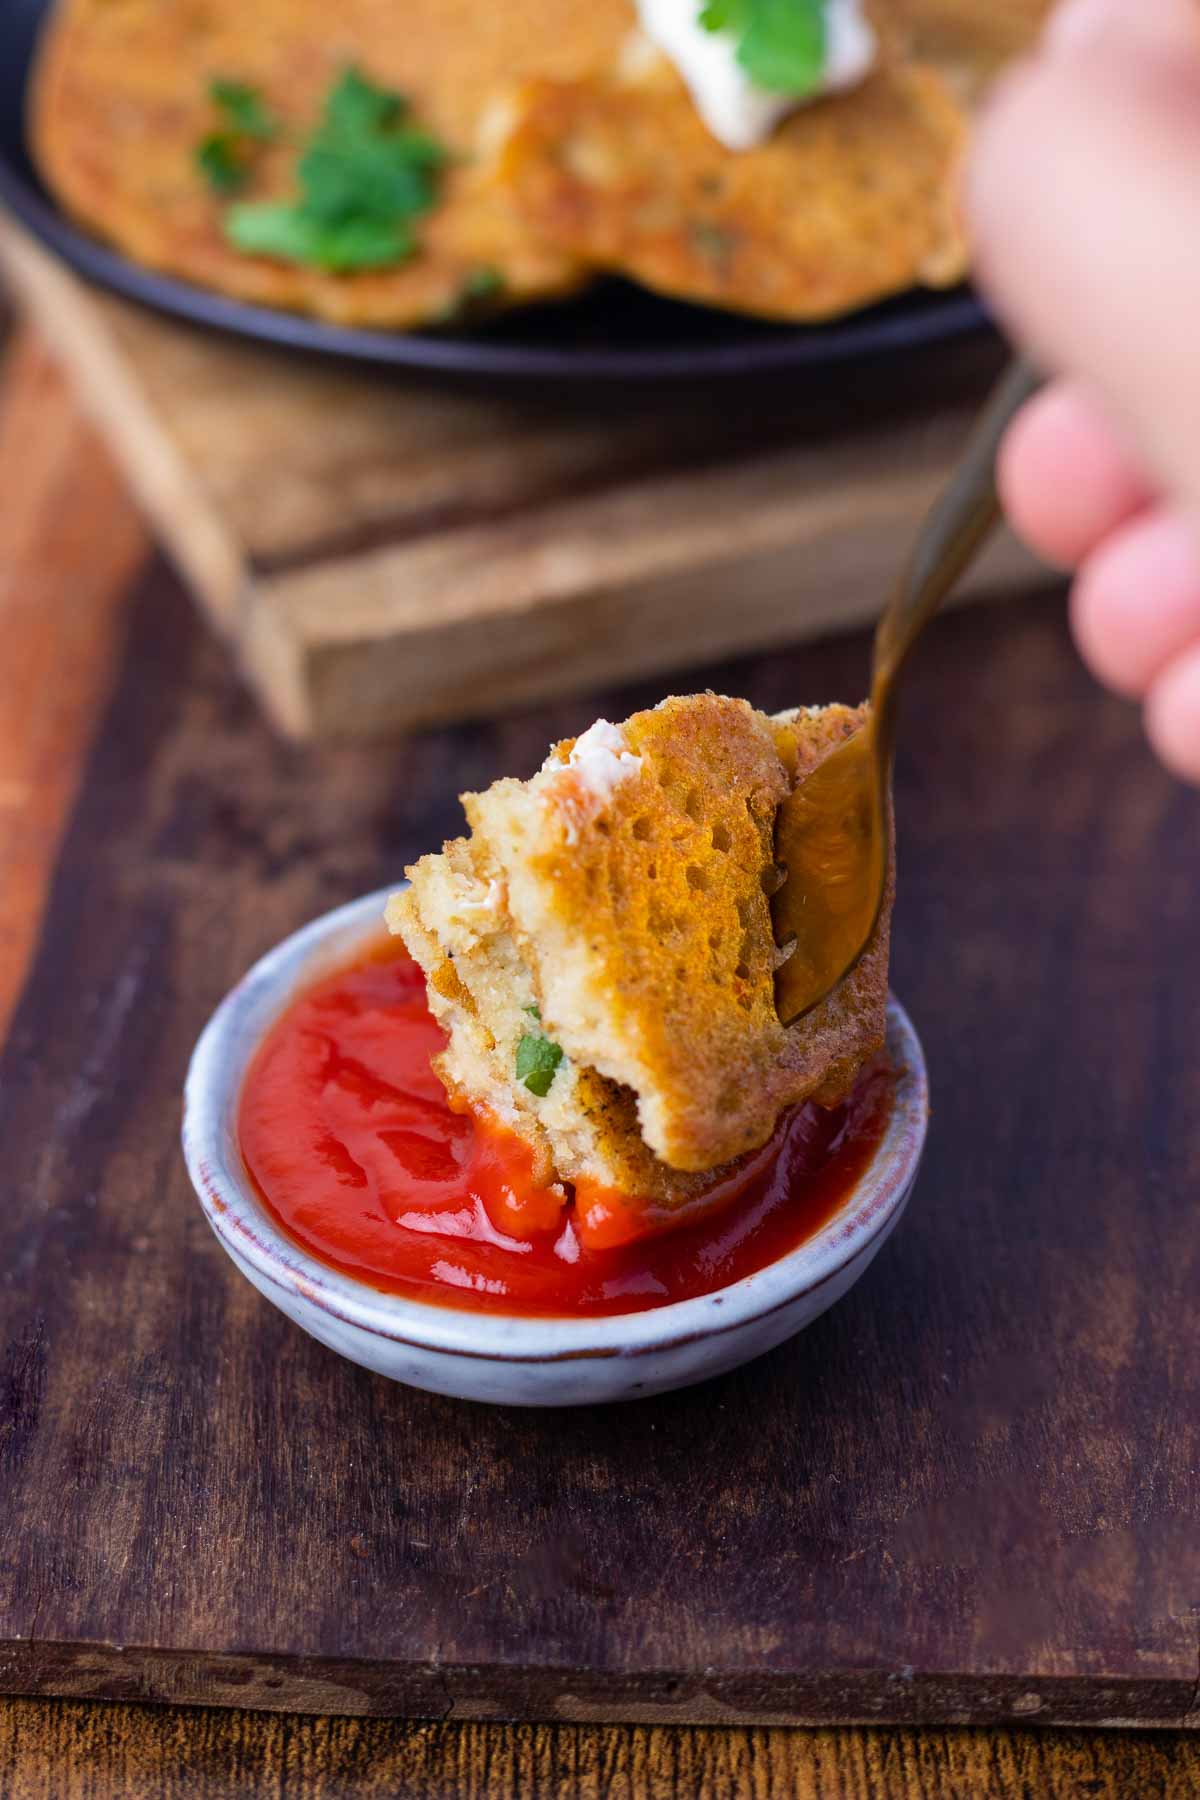 A forkful of lentil pancake being dipped into a small pot of tomato sauce.